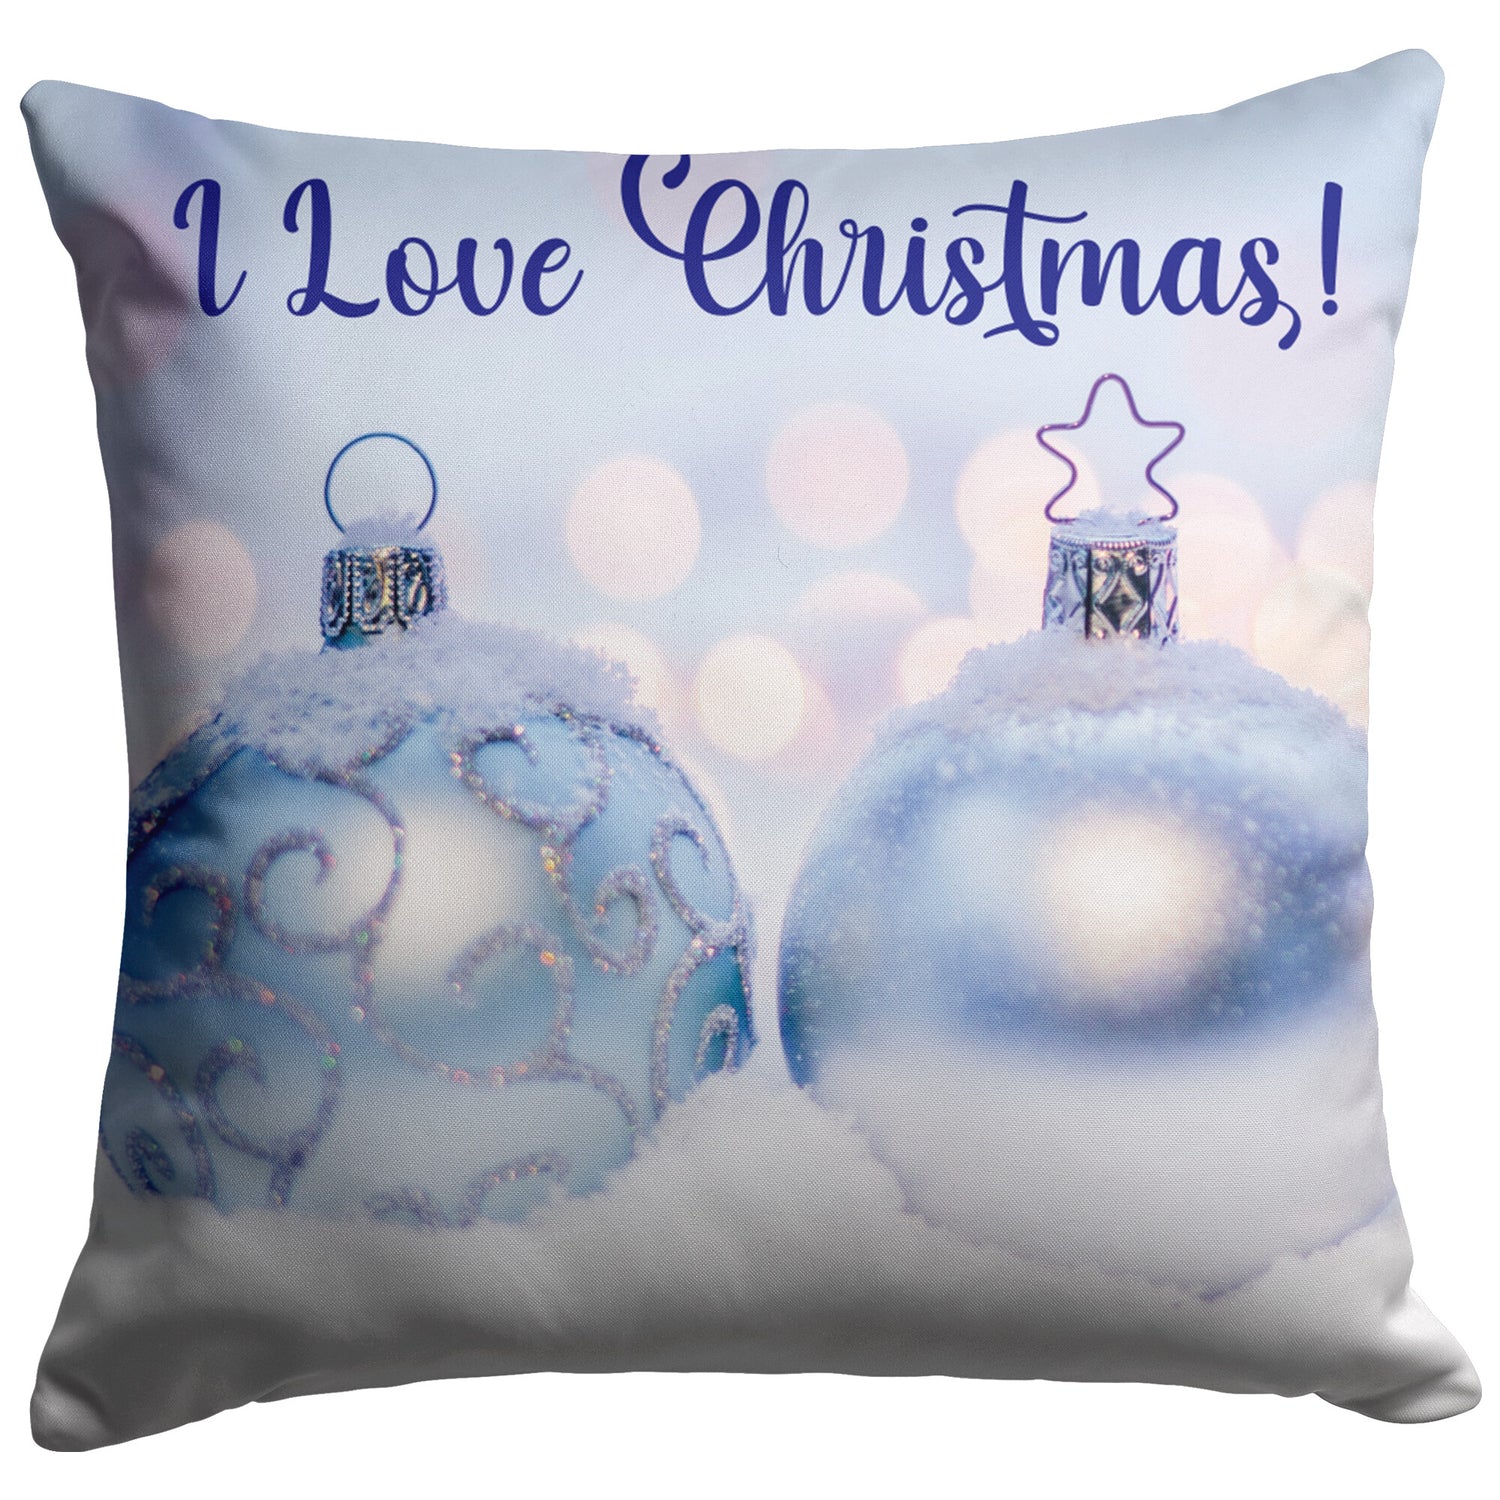 I Love Christmas! Pillow With Light Blue Accent - Signs and Seasons Gifts